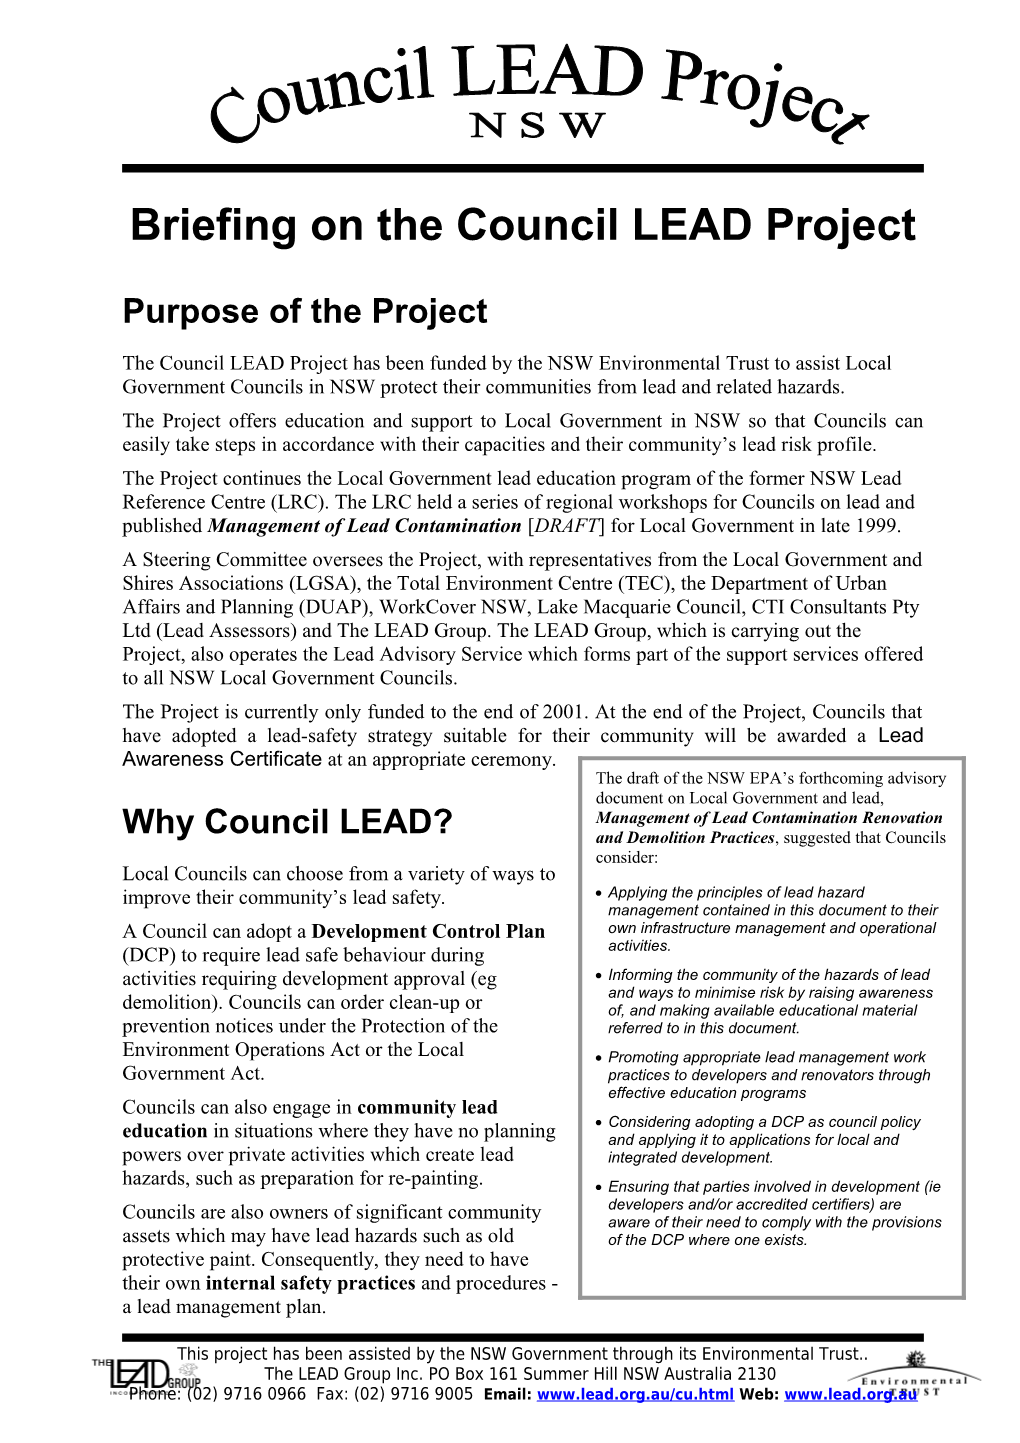 Council LEAD Project Overview